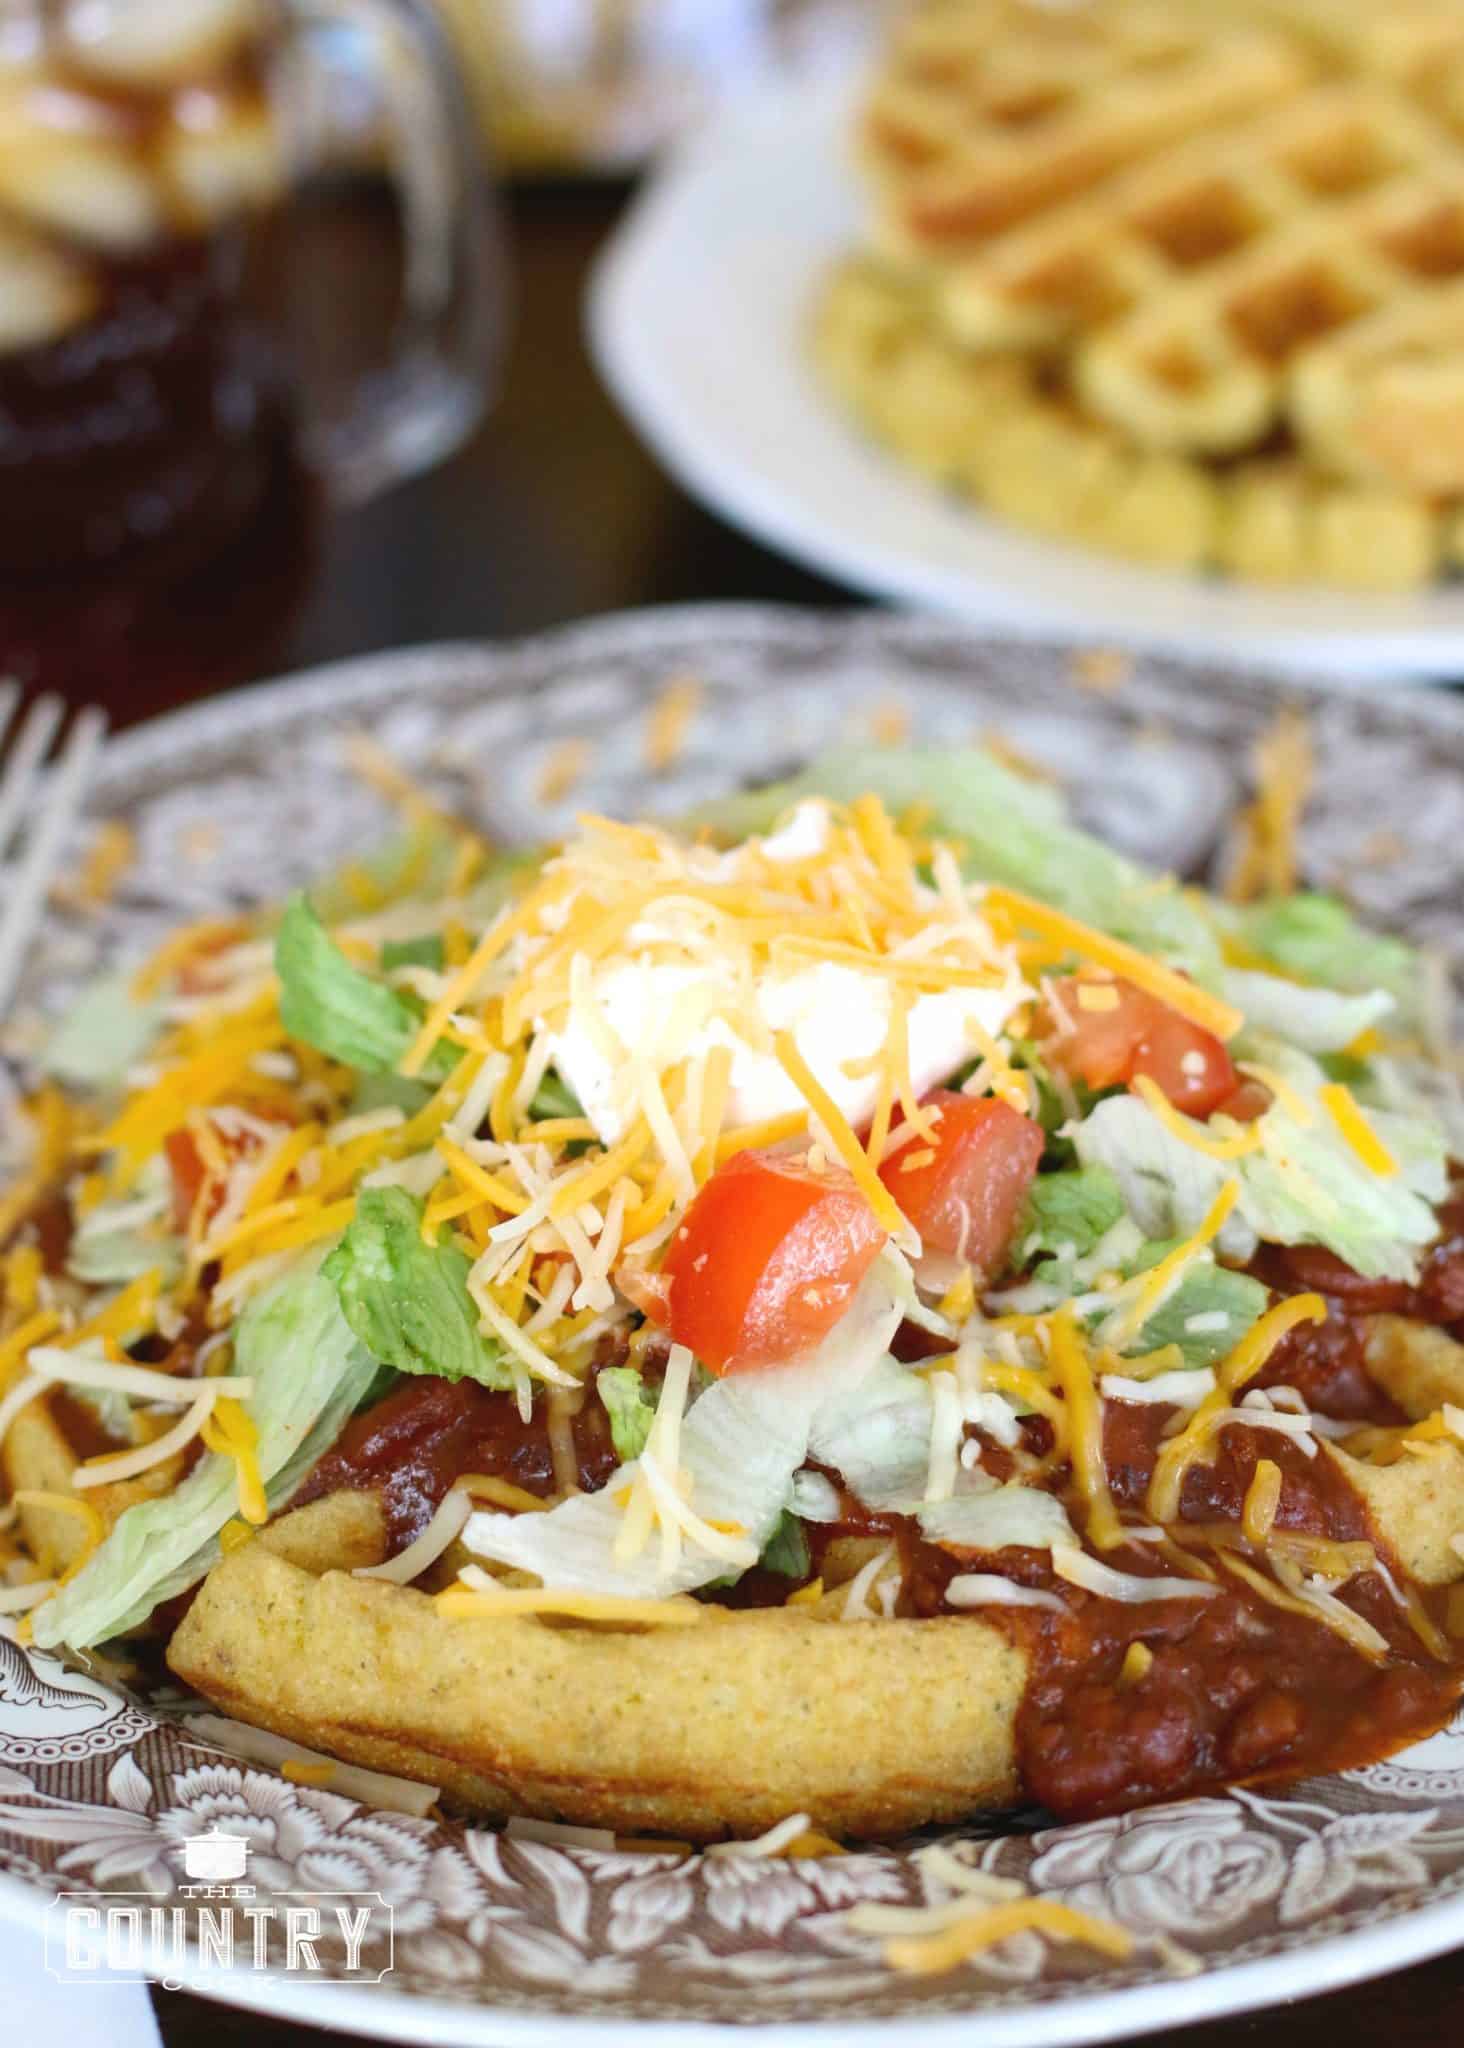 cornbread waffle shown on a brown and white plate. Waffle is topped with chili, lettuce, shredded cheese, sour cream and diced tomatoes. 